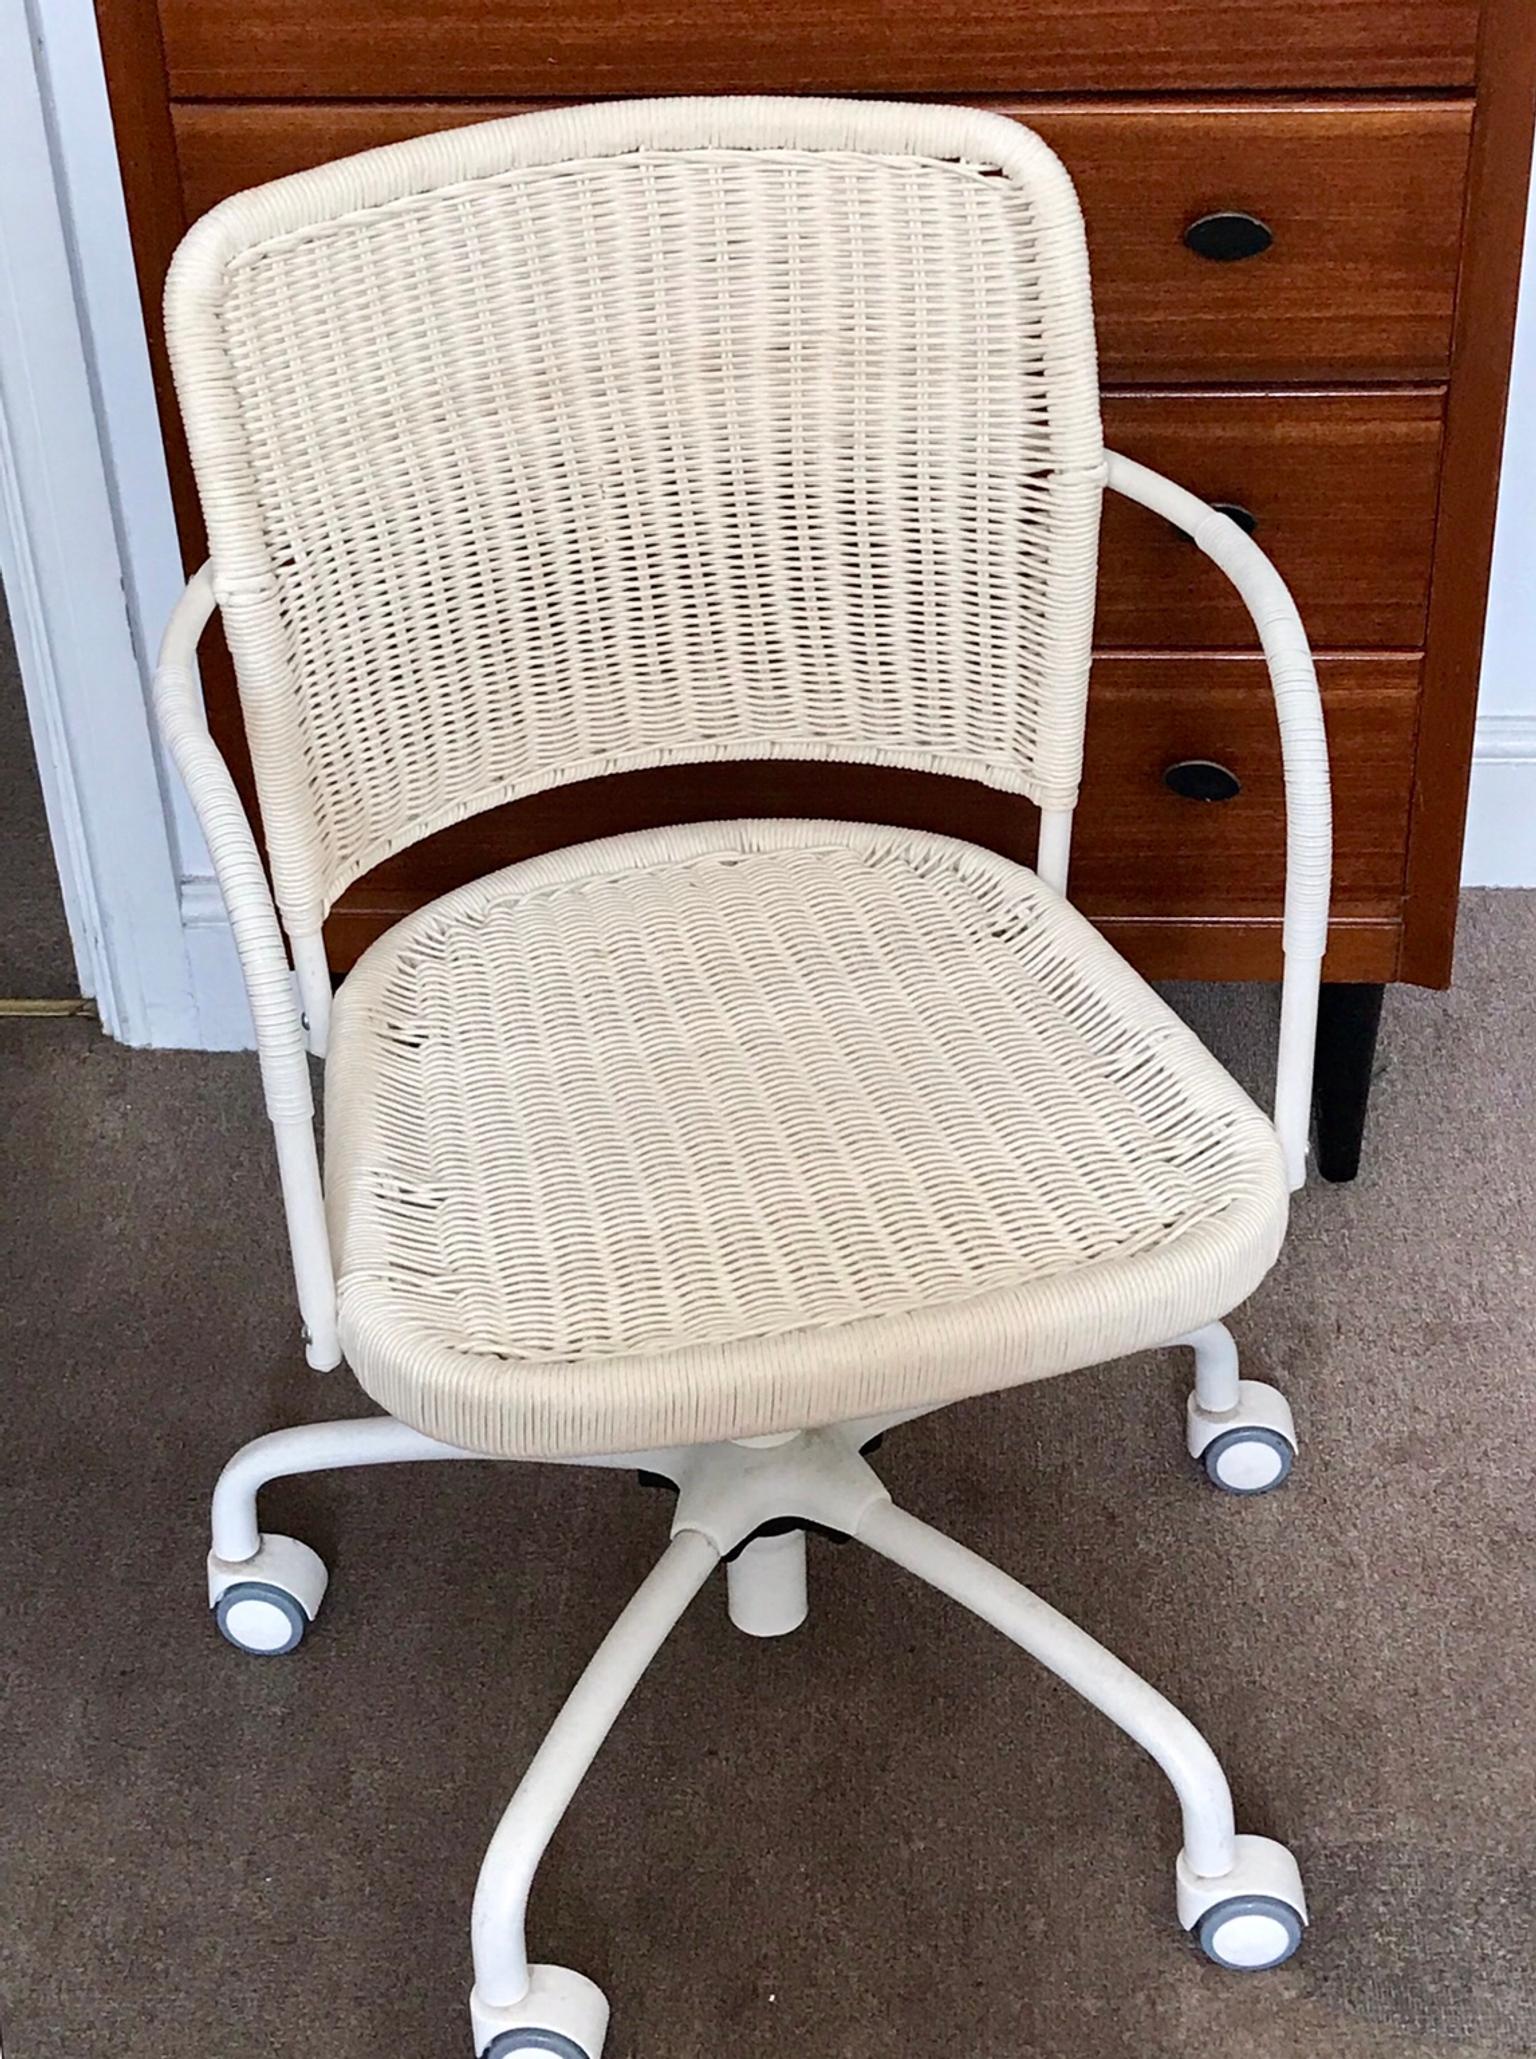 IKEA Cream off white rattan office chair in E8 Hackney for